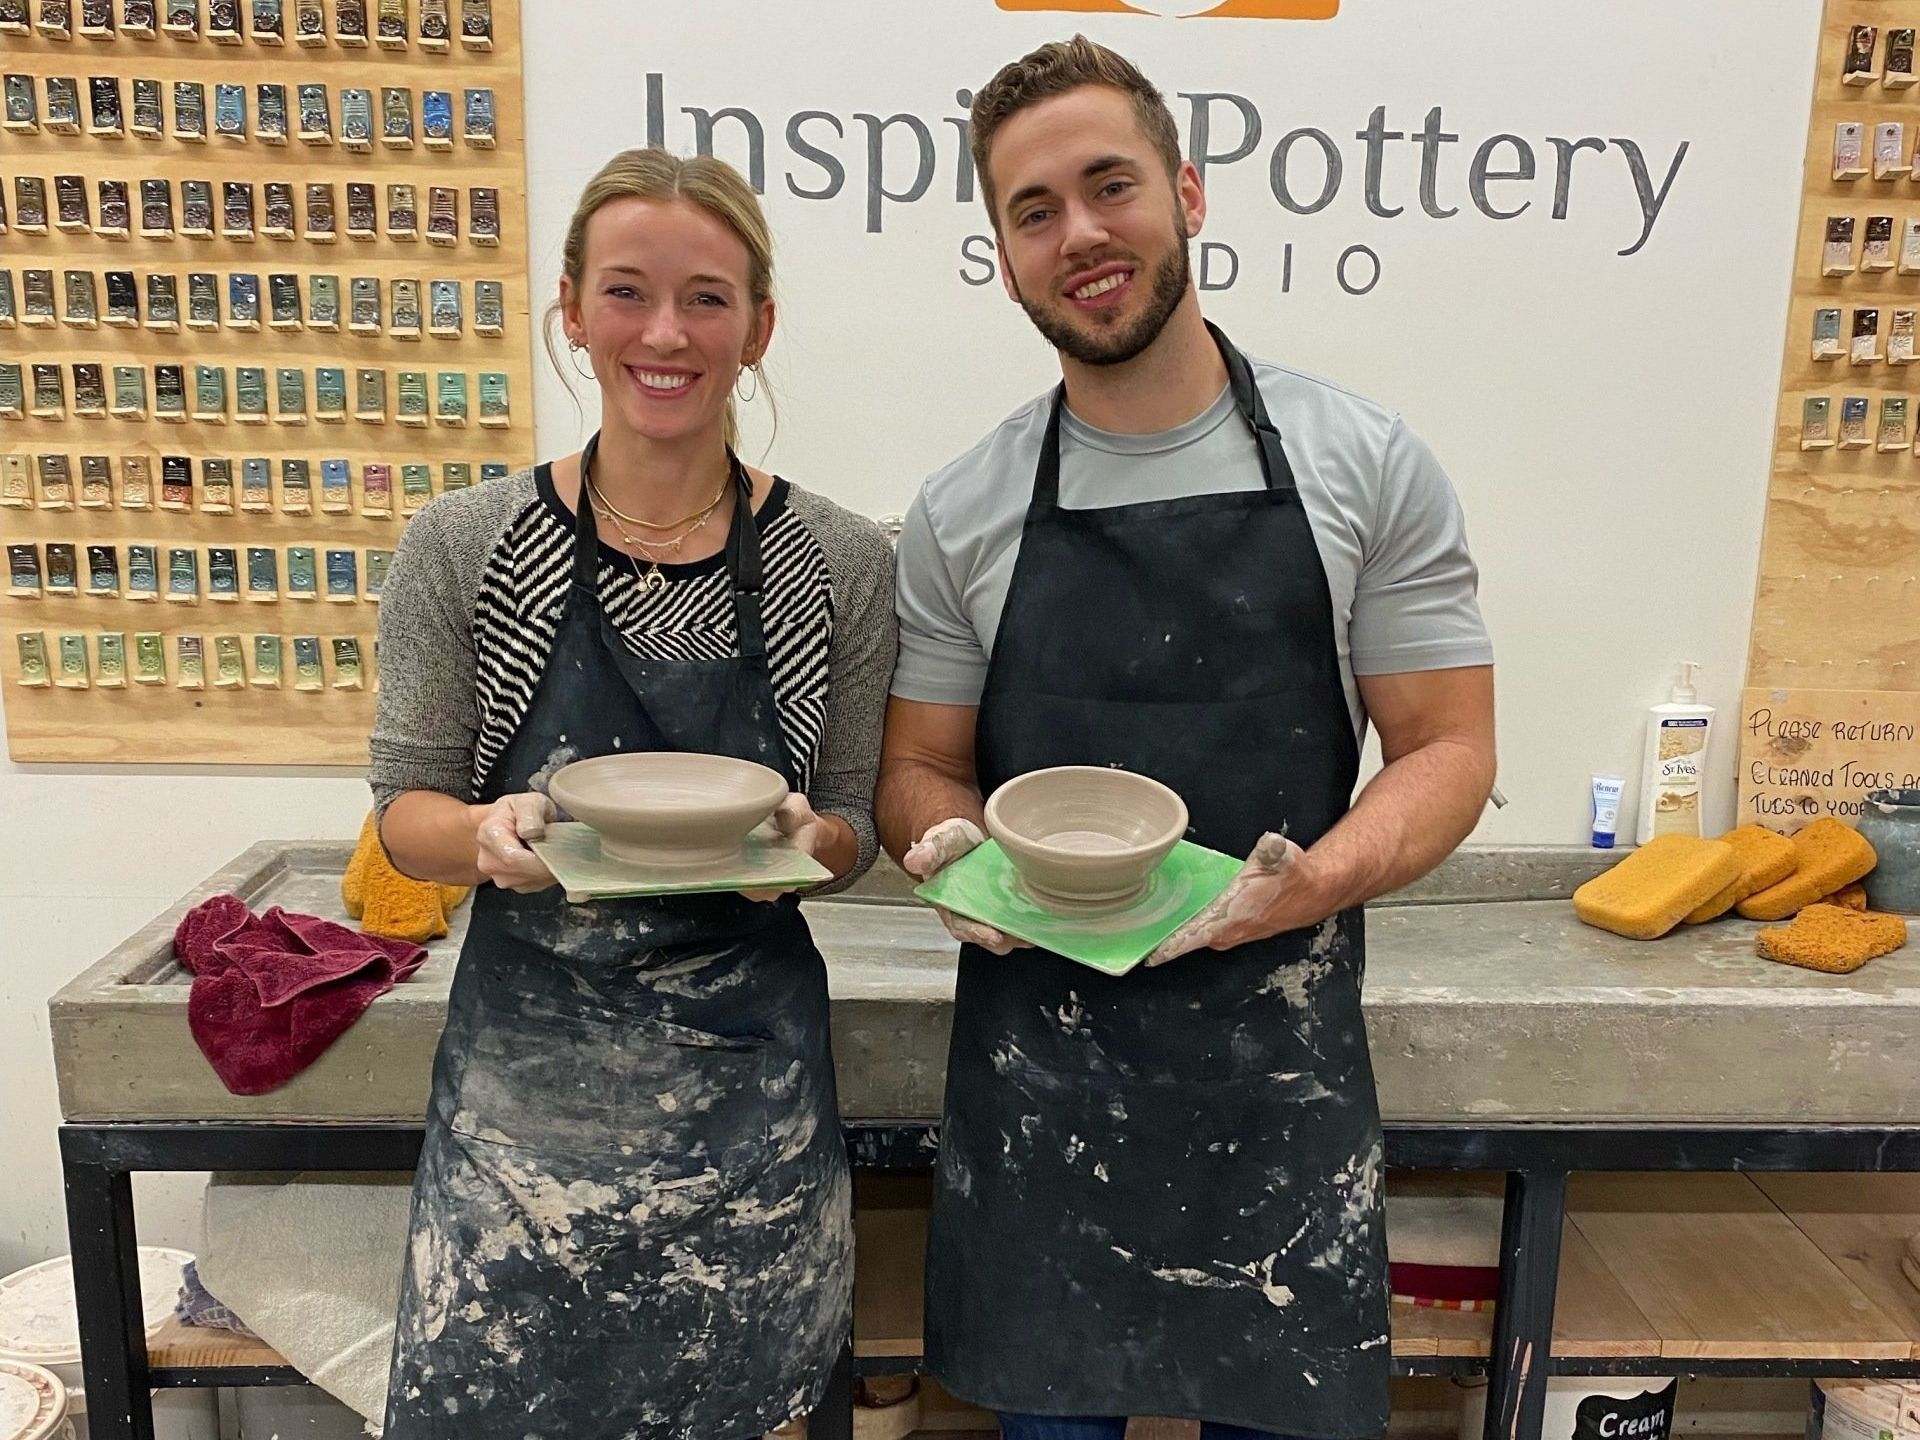 a man and a woman are holding bowls in front of a sign that says inspire pottery studio